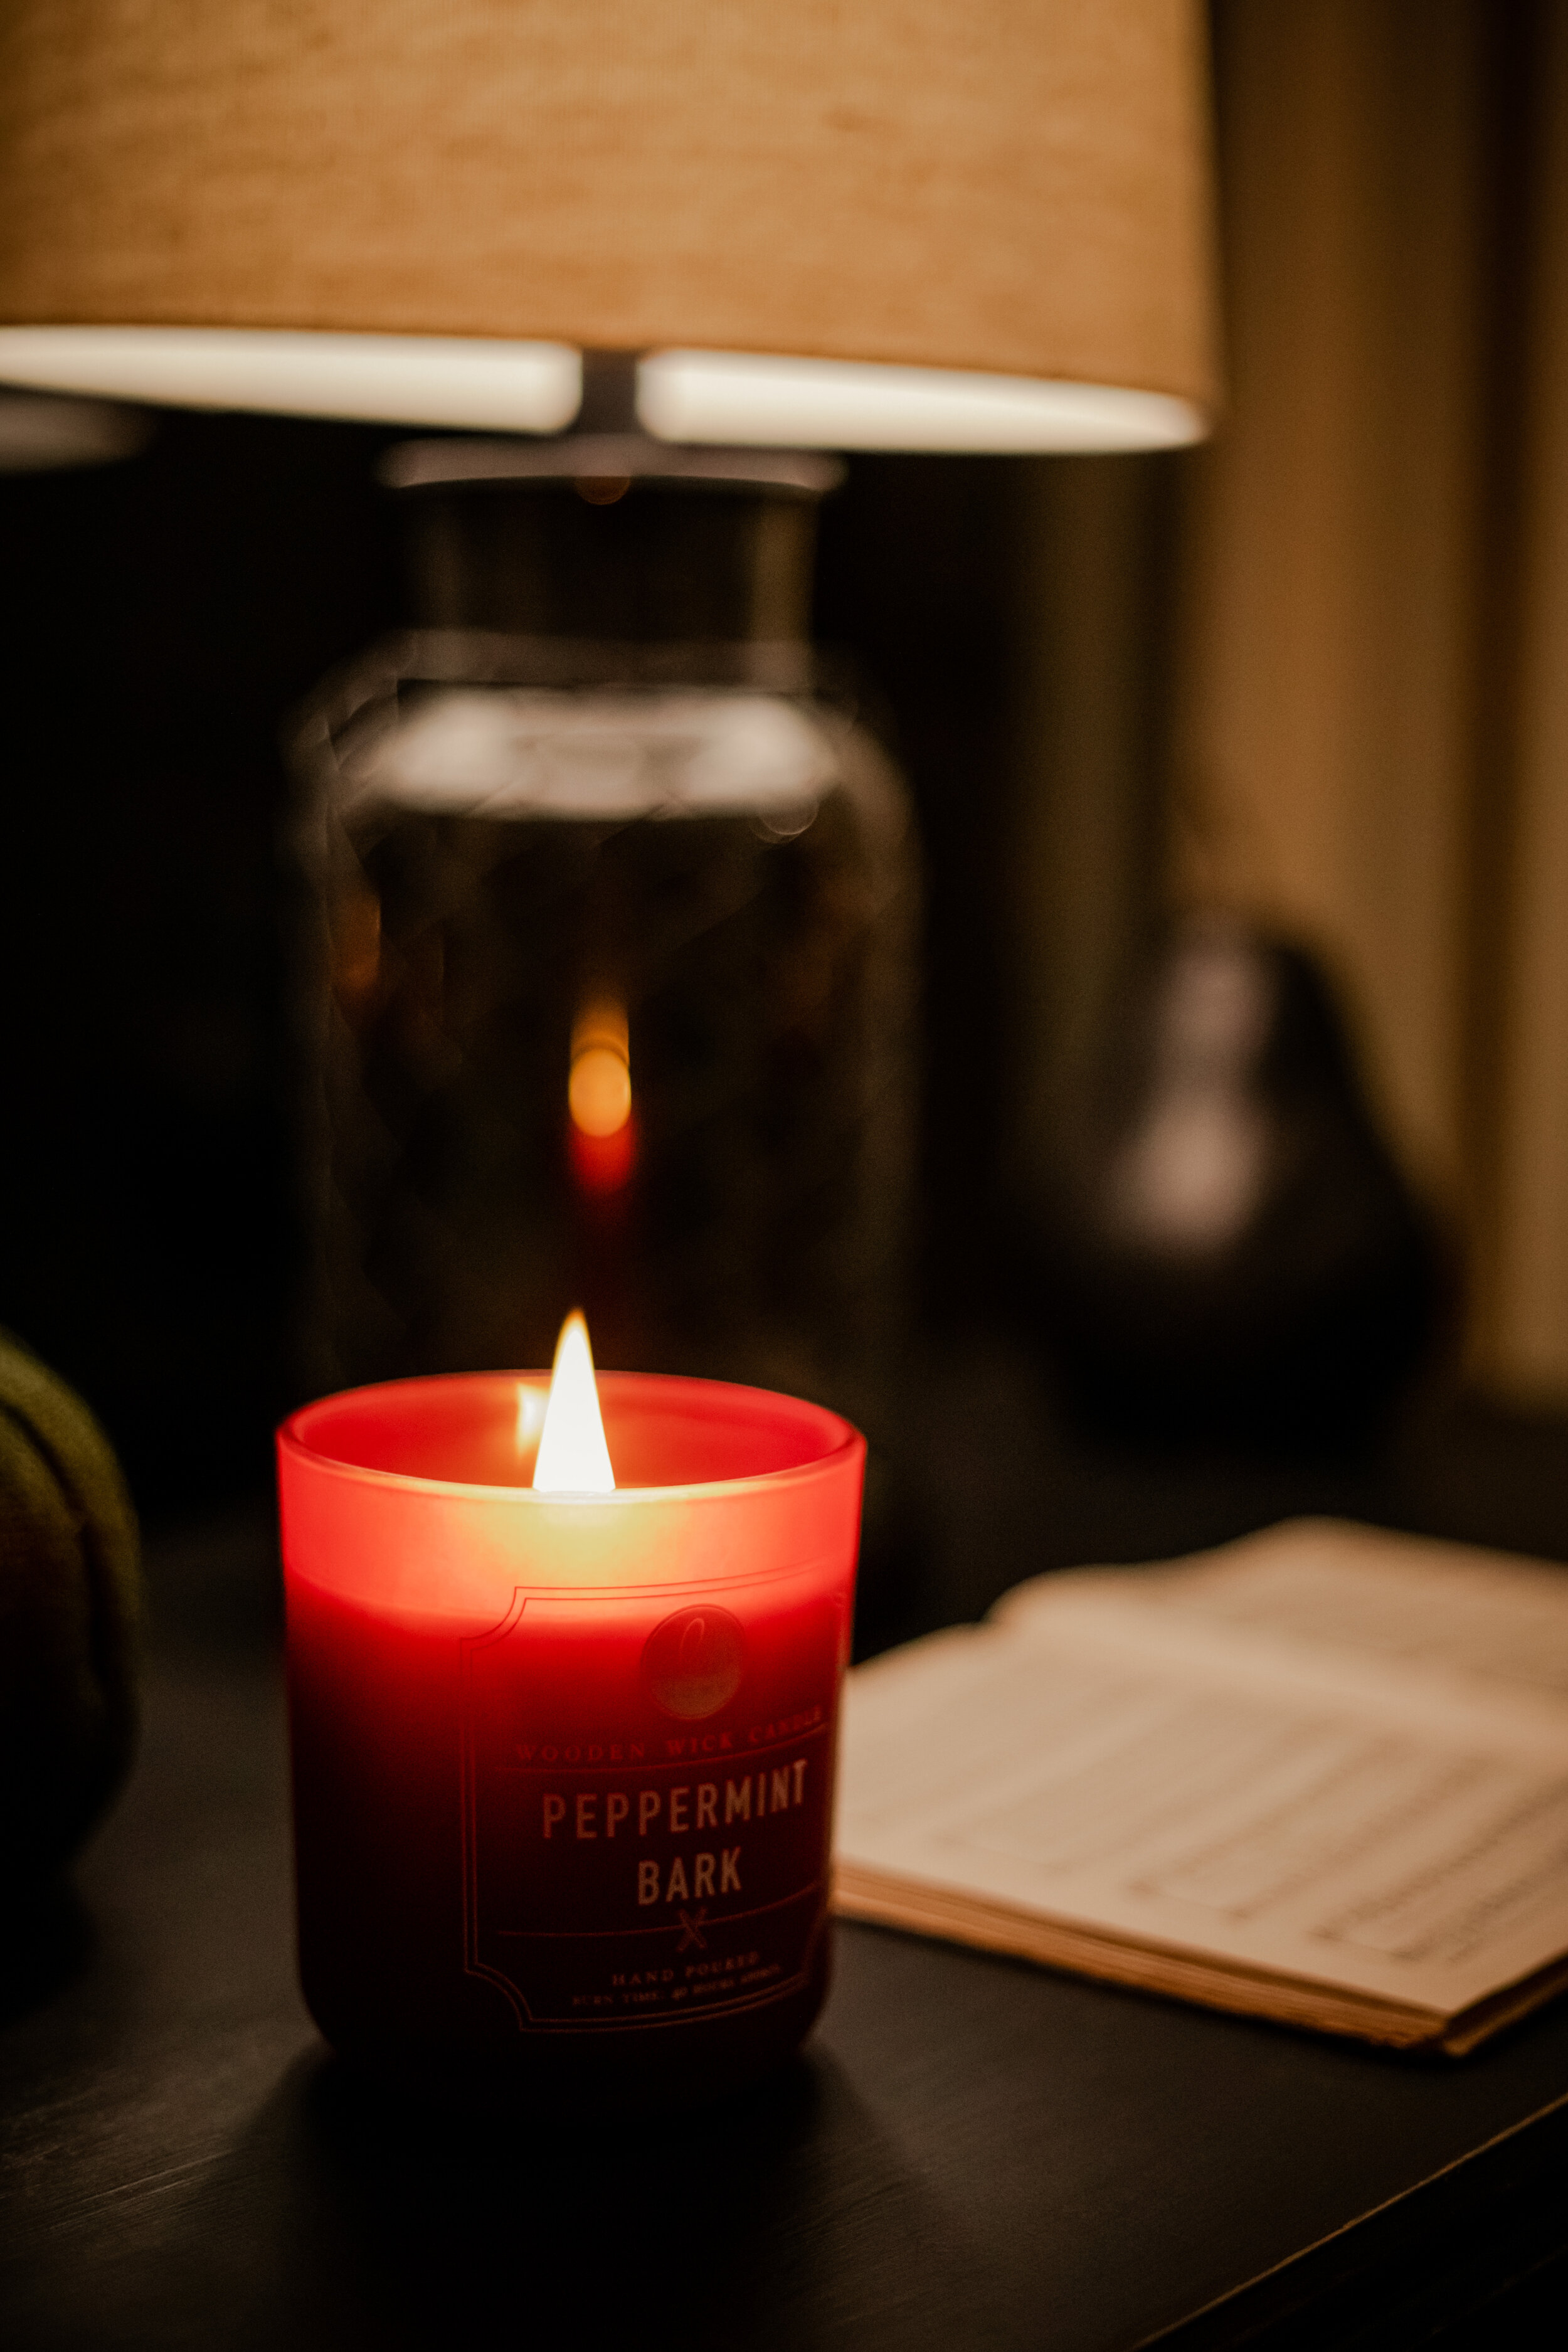 If the diffuser is not an option and you are in a location that allows it, try burning a candle.